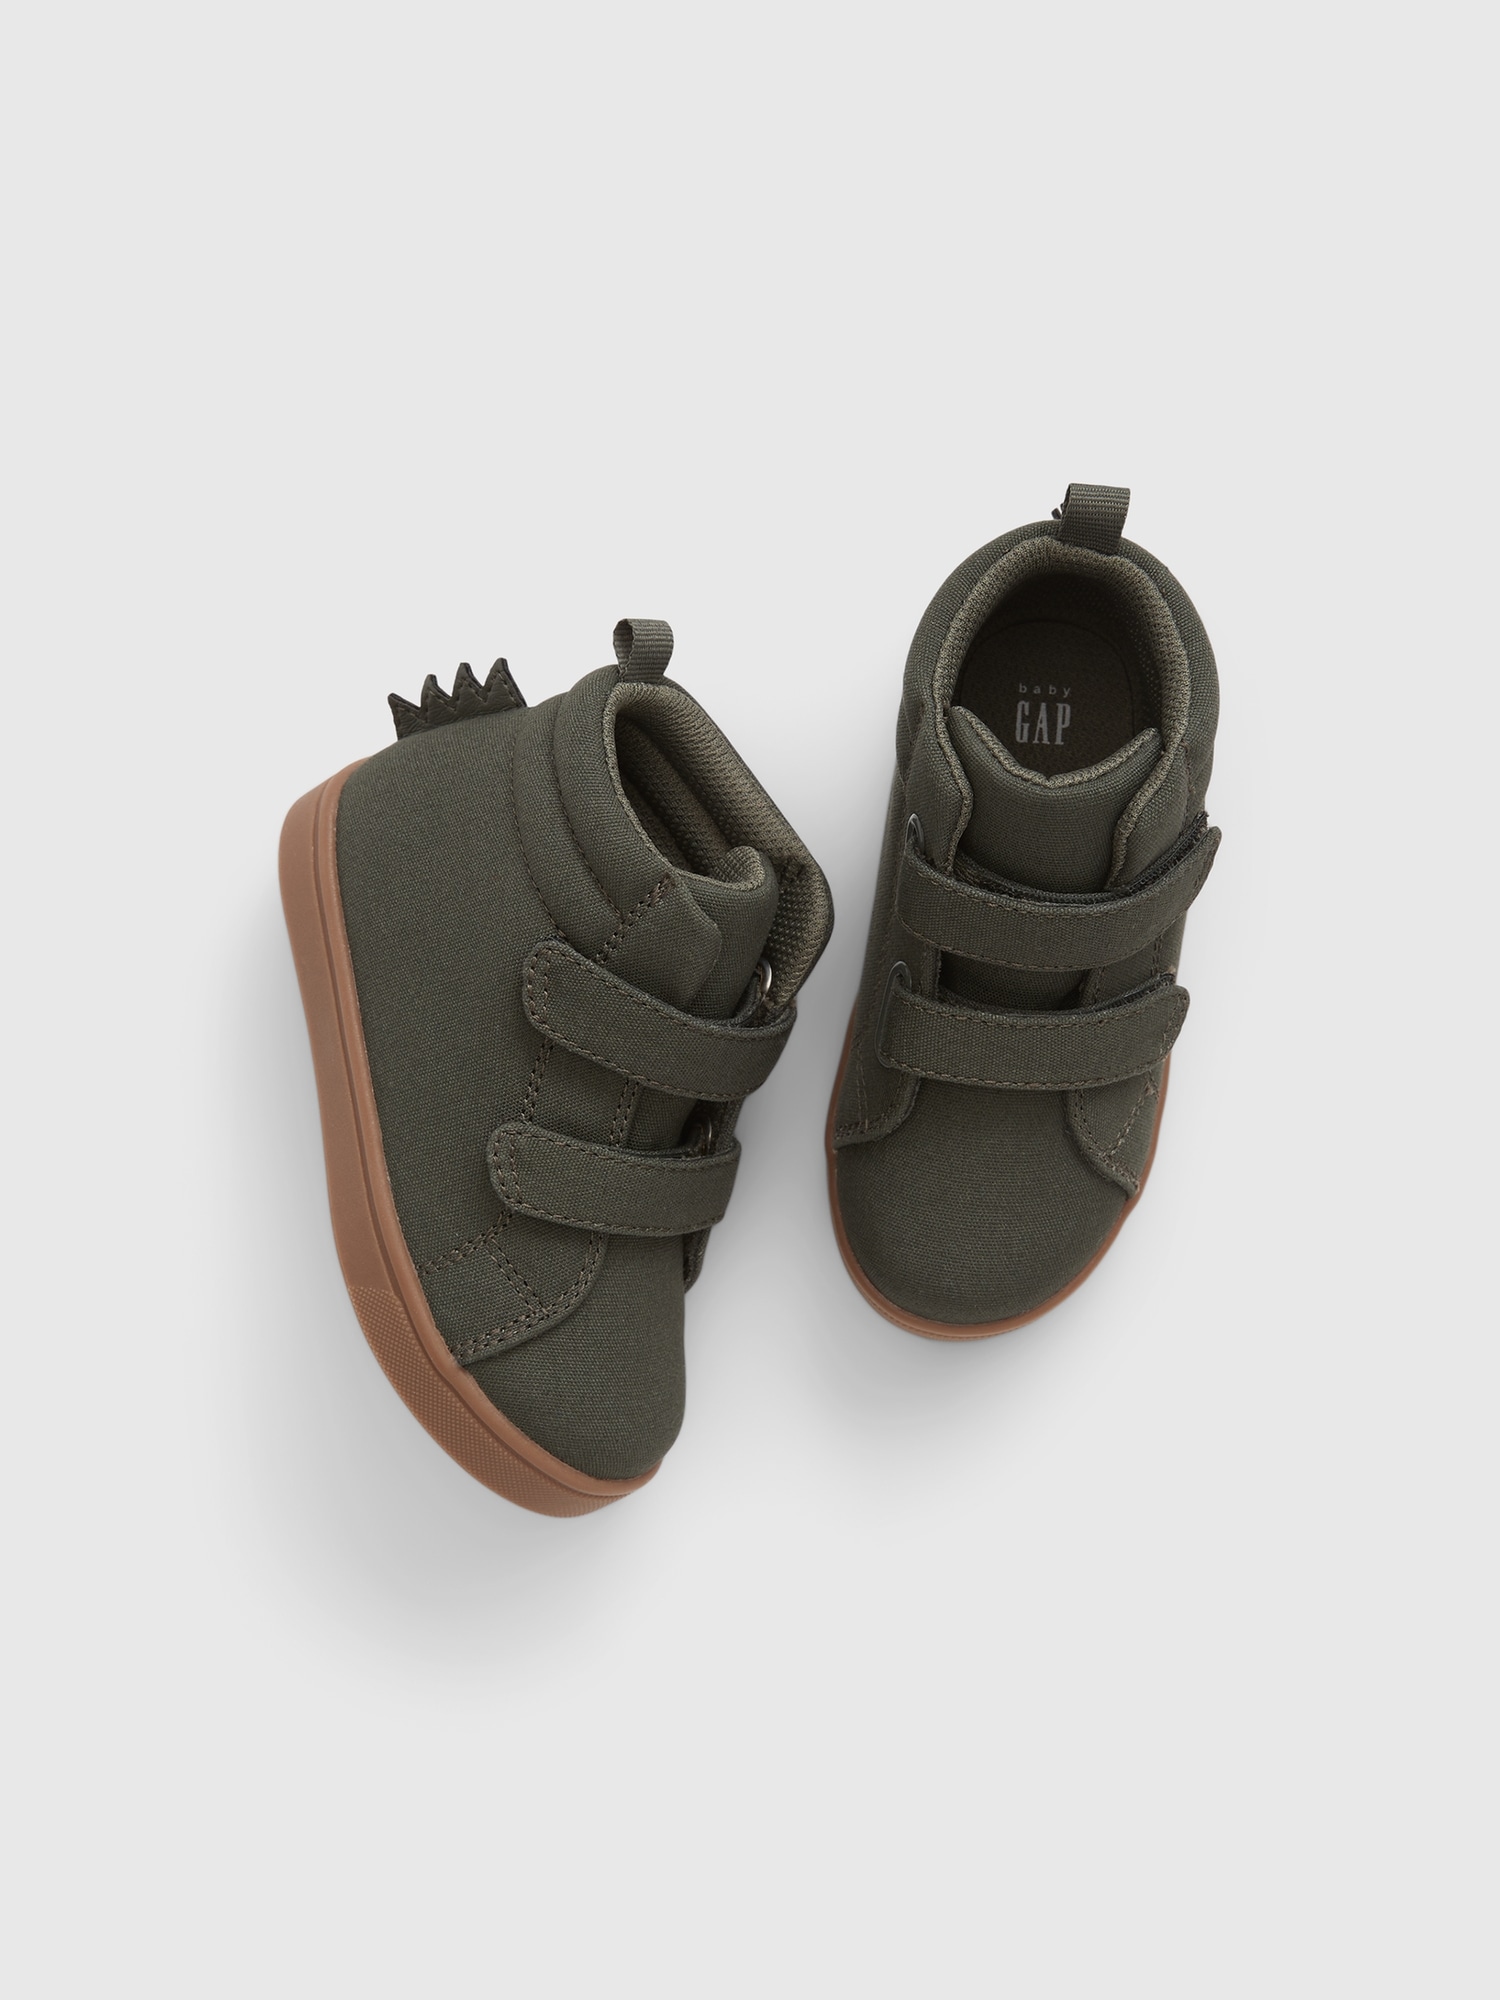 Gap Babies' Toddler Dino High-top Sneakers In Olive Green